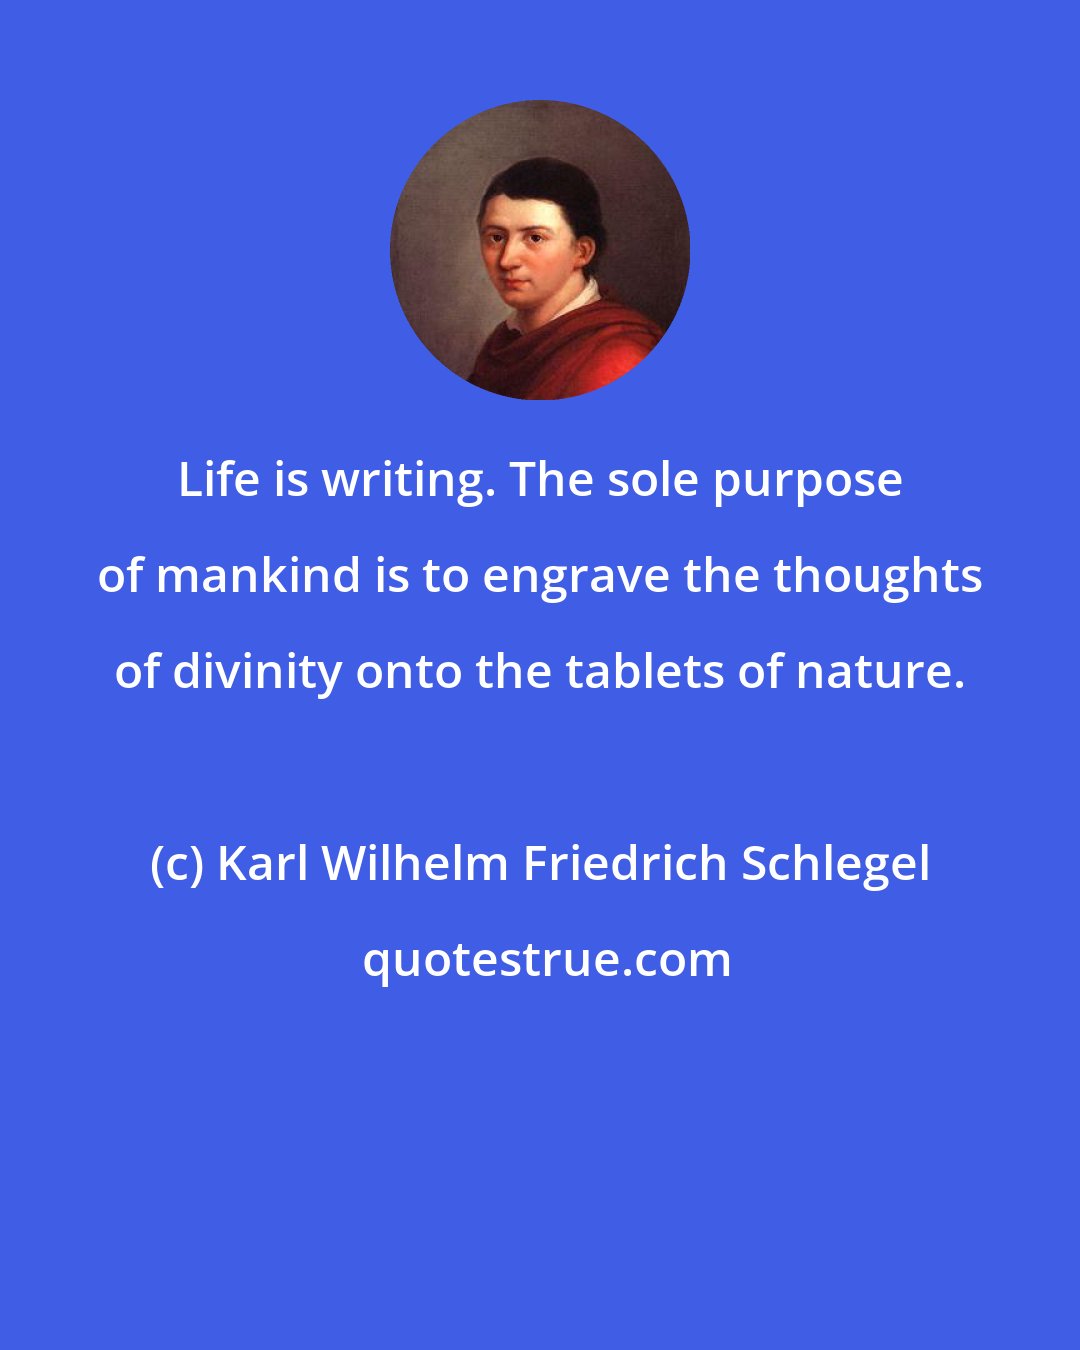 Karl Wilhelm Friedrich Schlegel: Life is writing. The sole purpose of mankind is to engrave the thoughts of divinity onto the tablets of nature.